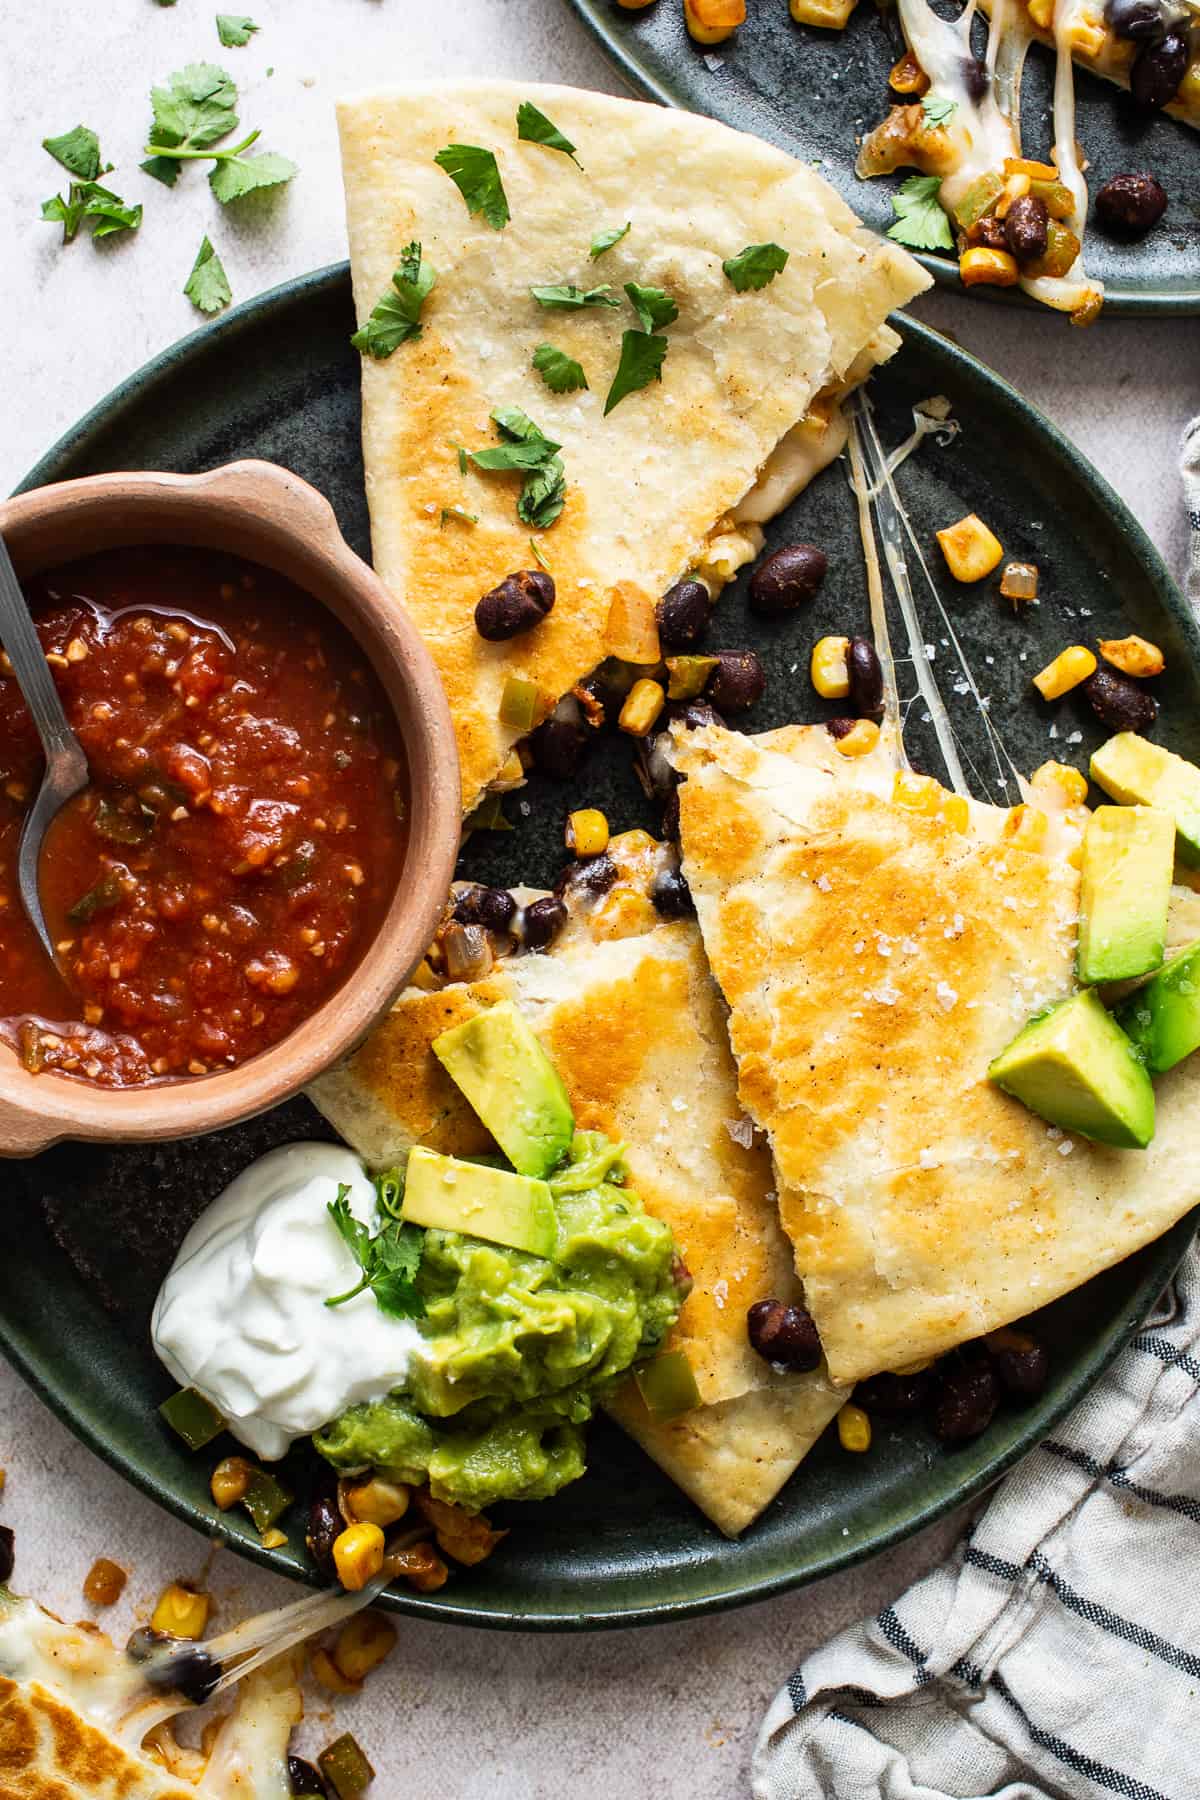 A crispy golden brown black bean quesadilla on a plate sliced into triangles with cheese oozing out.